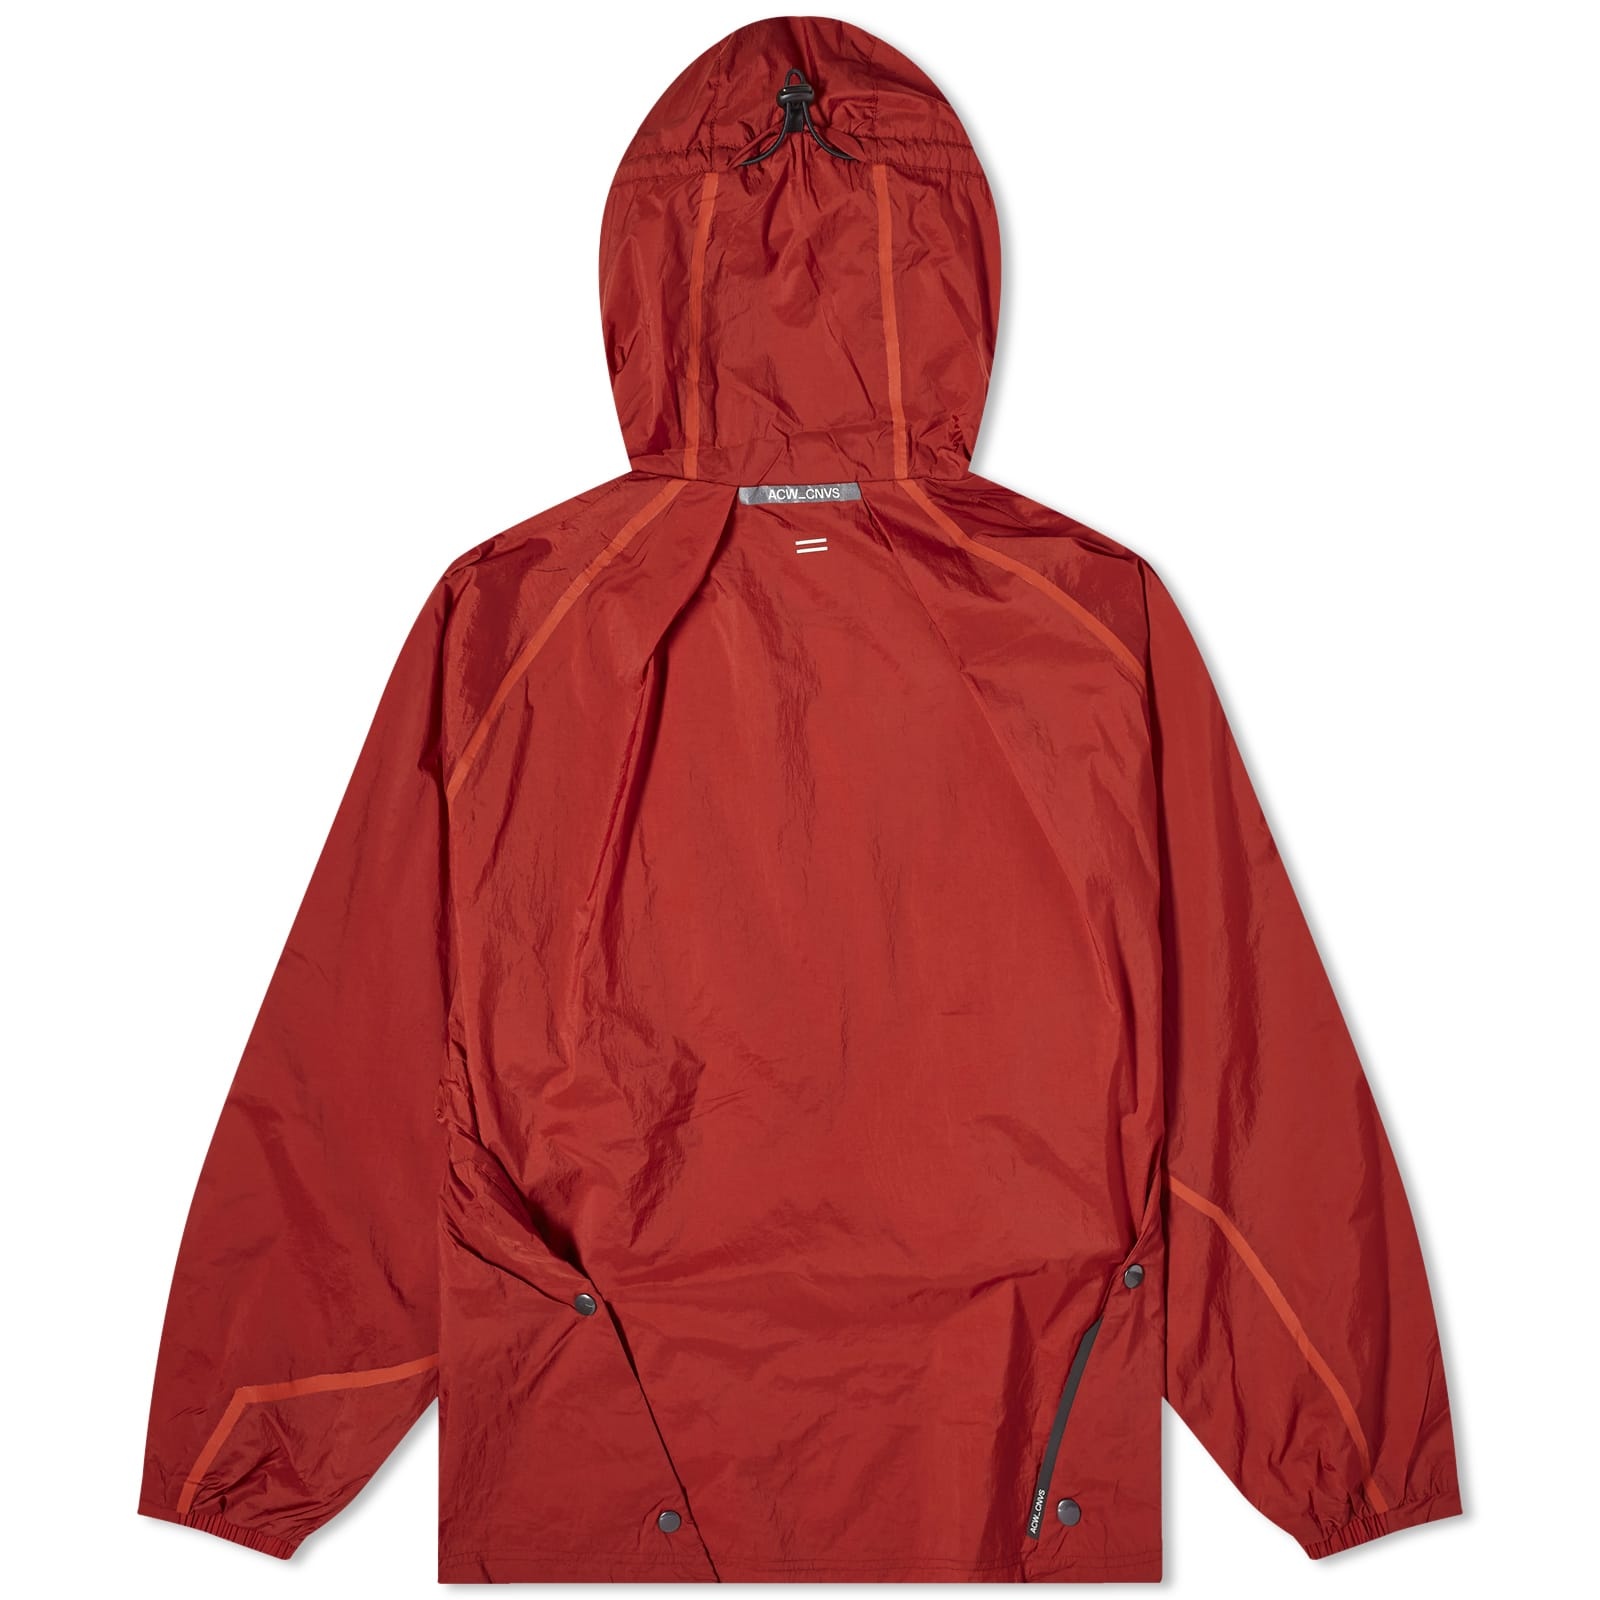 Converse x A-COLD-WALL* Wind Jacket - 2